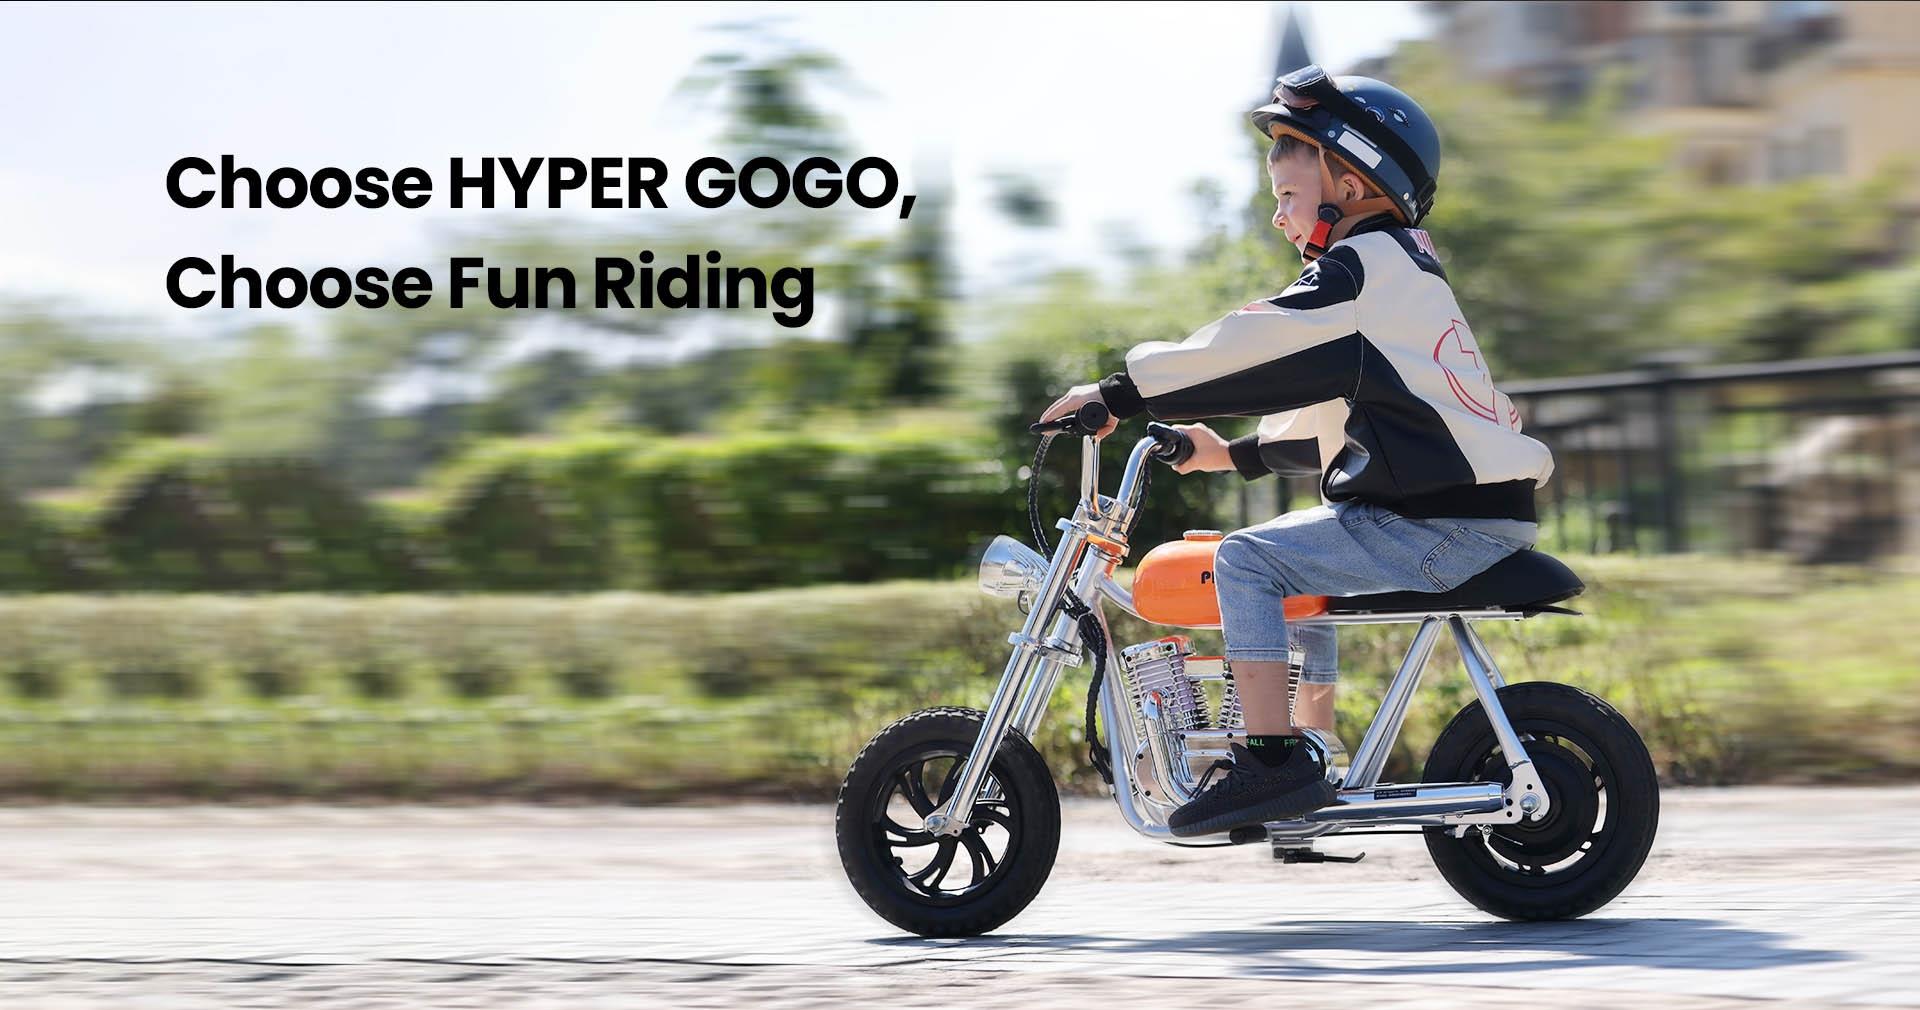 HYPER GOGO Pioneer 12 Plus with App Electric Motorcycle for Kids, 5.2Ah 160W with 12x3 Tires, 12KM Top Range - Orange